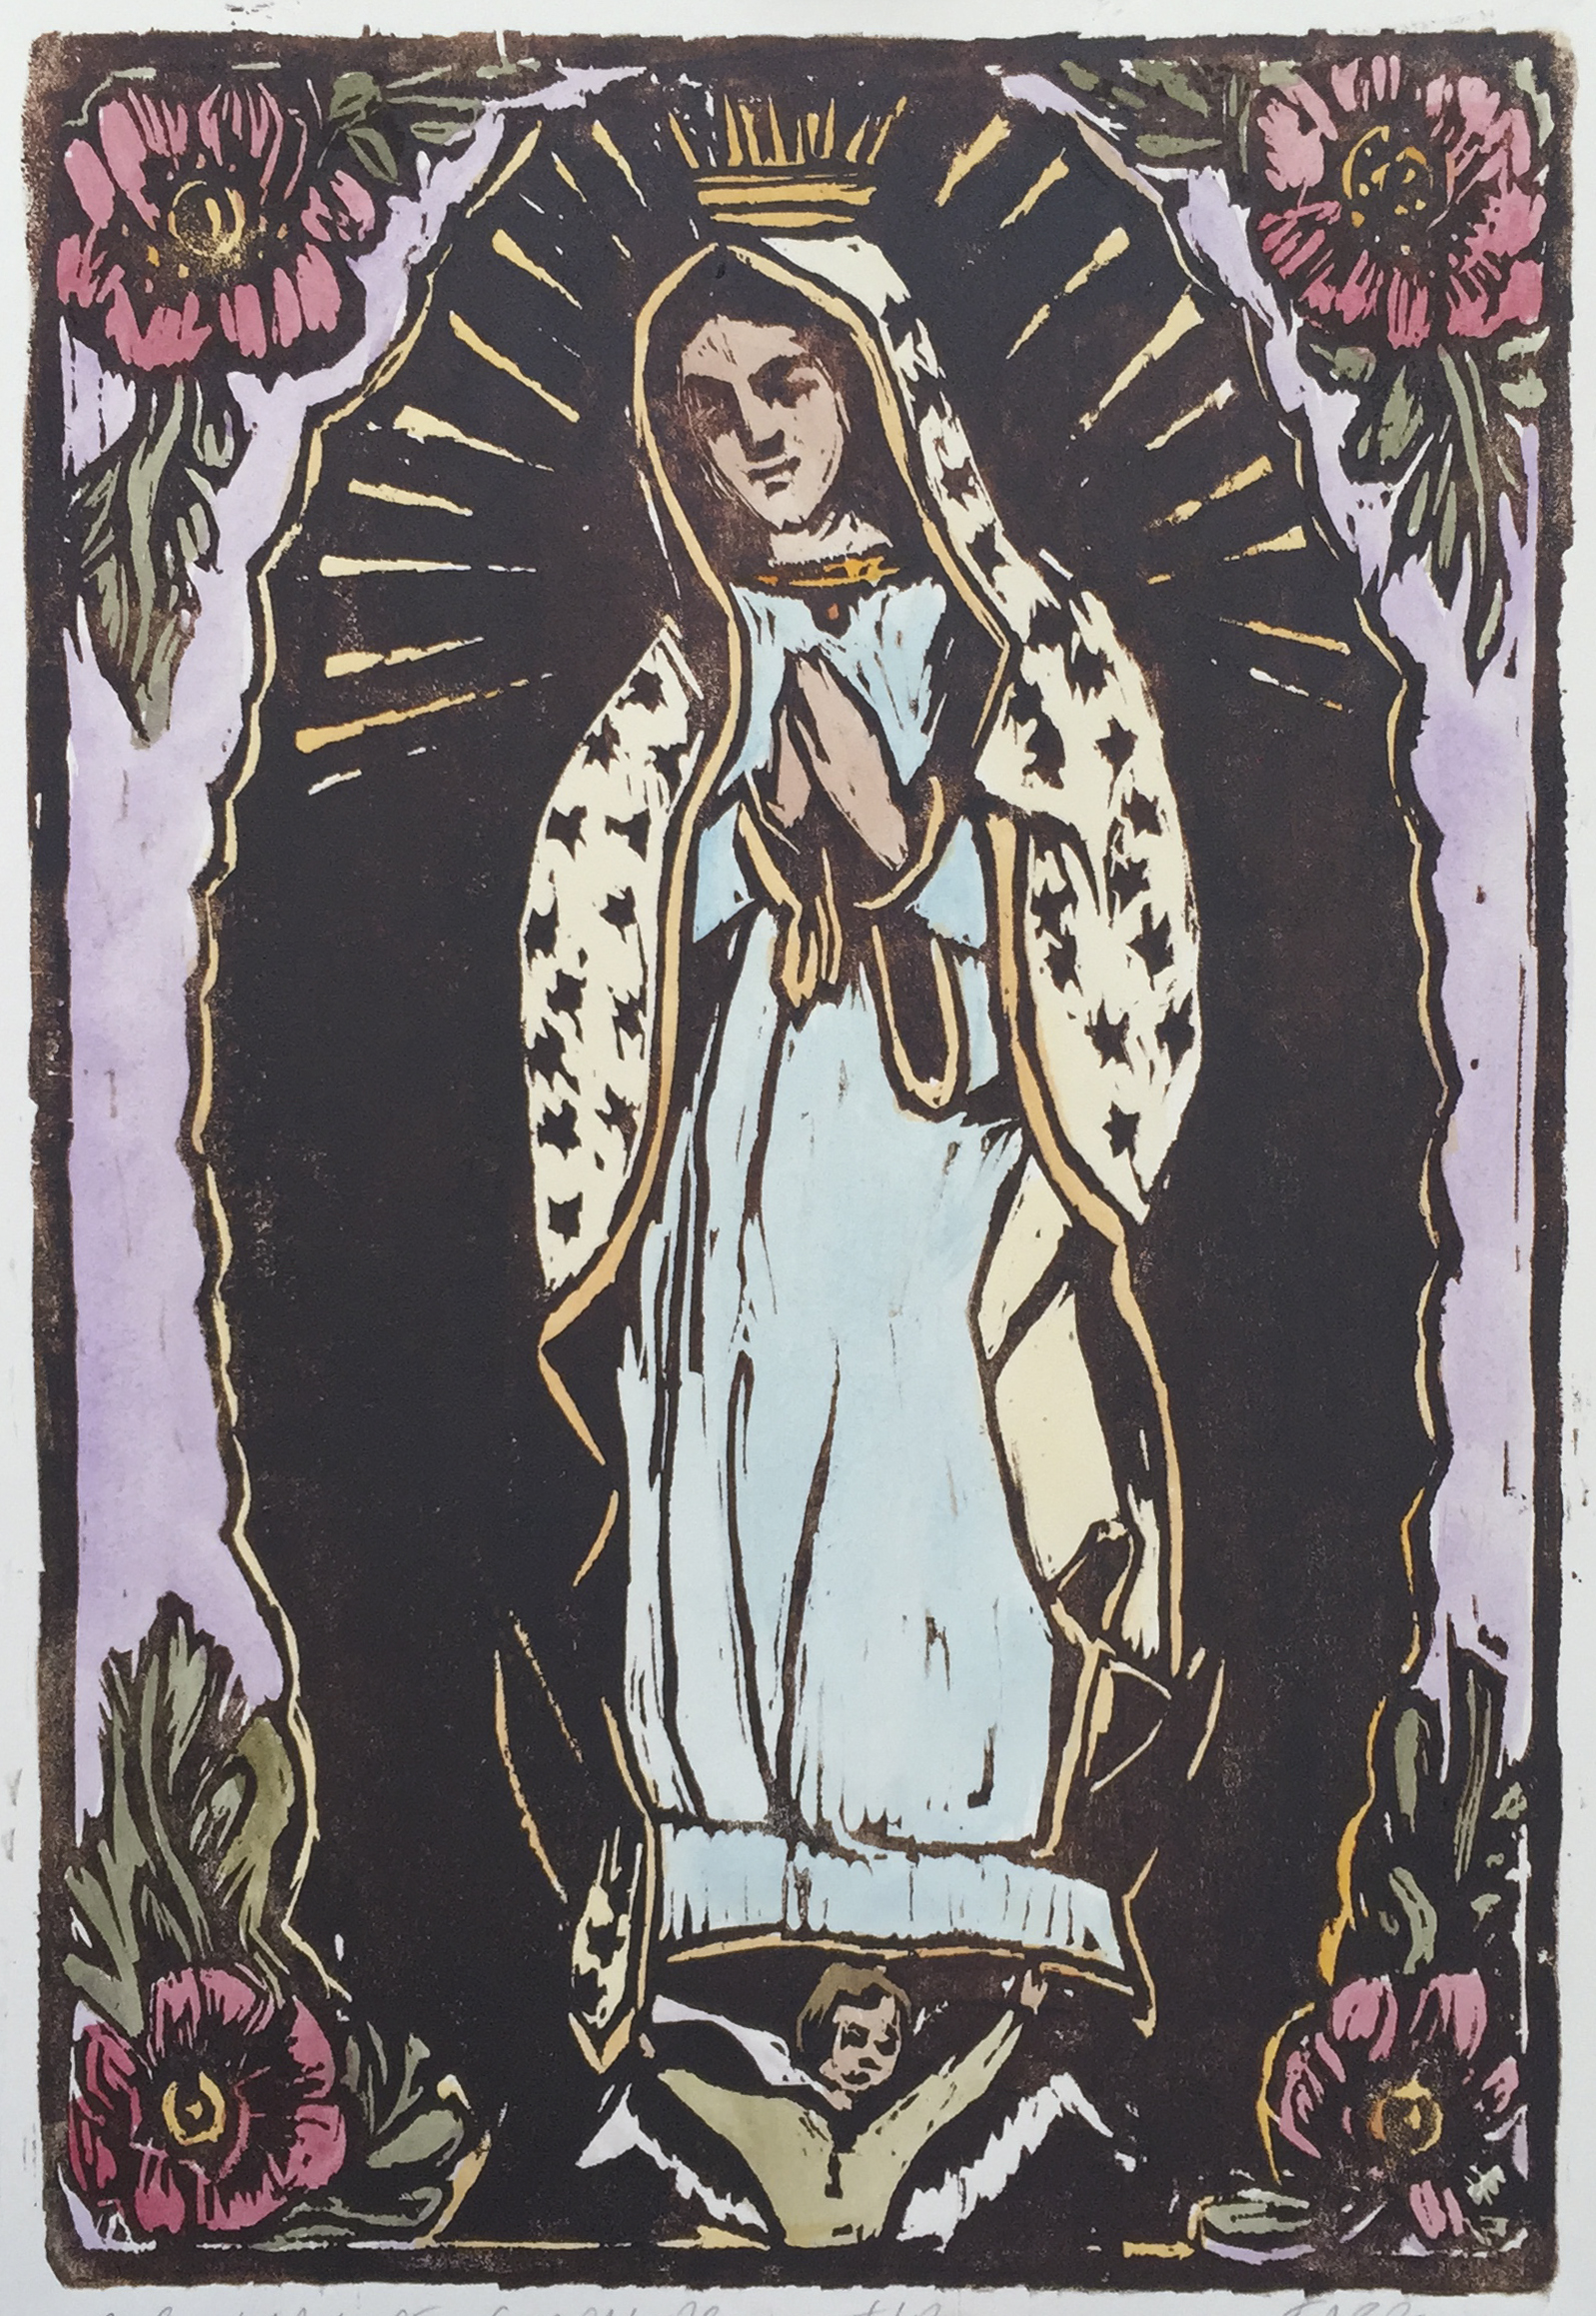   Our Lady of Guadalupe   woodblock print with hand-coloring  unique edition  8x12"  2015 